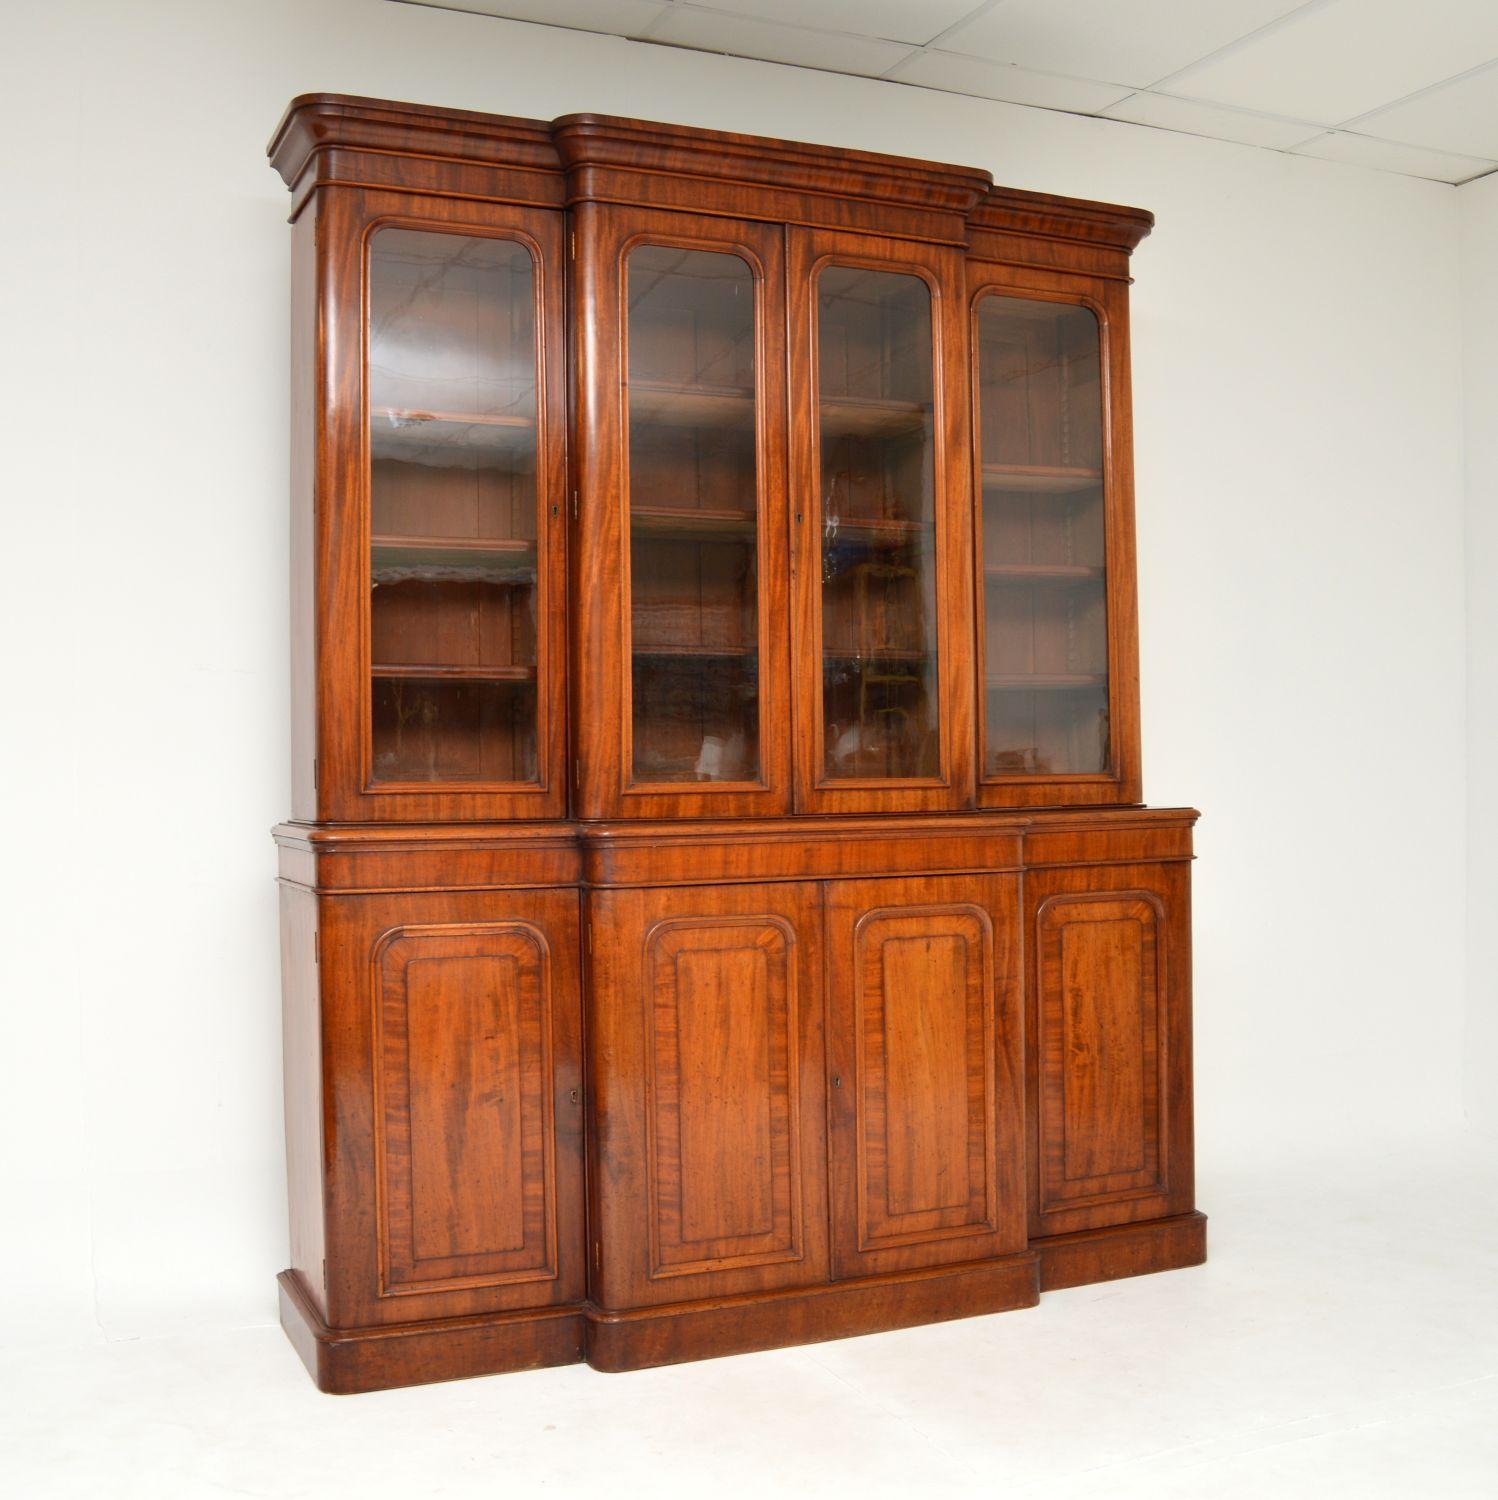 A grand and impressive antique Victorian breakfront library bookcase. This was made in England, it dates from the 1860-1880 period.

It is very rare to find this model from the period, it is a great size and is of super quality. The wood has a